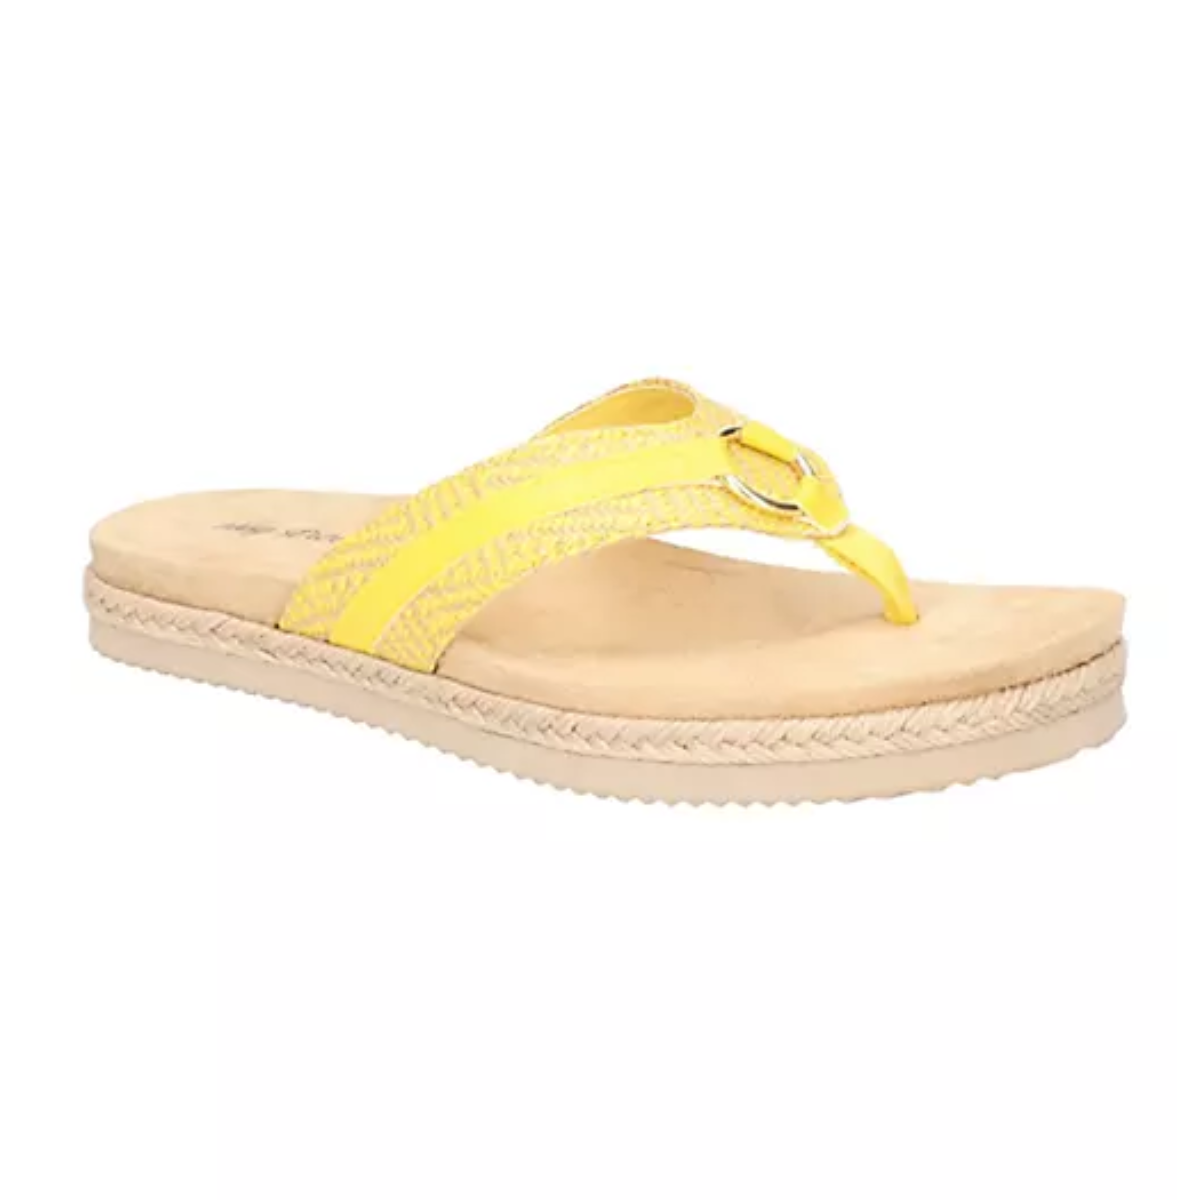 A comfortable Starling Woven in Yellow thong sandal by Easy Street with a yellow rope trim.